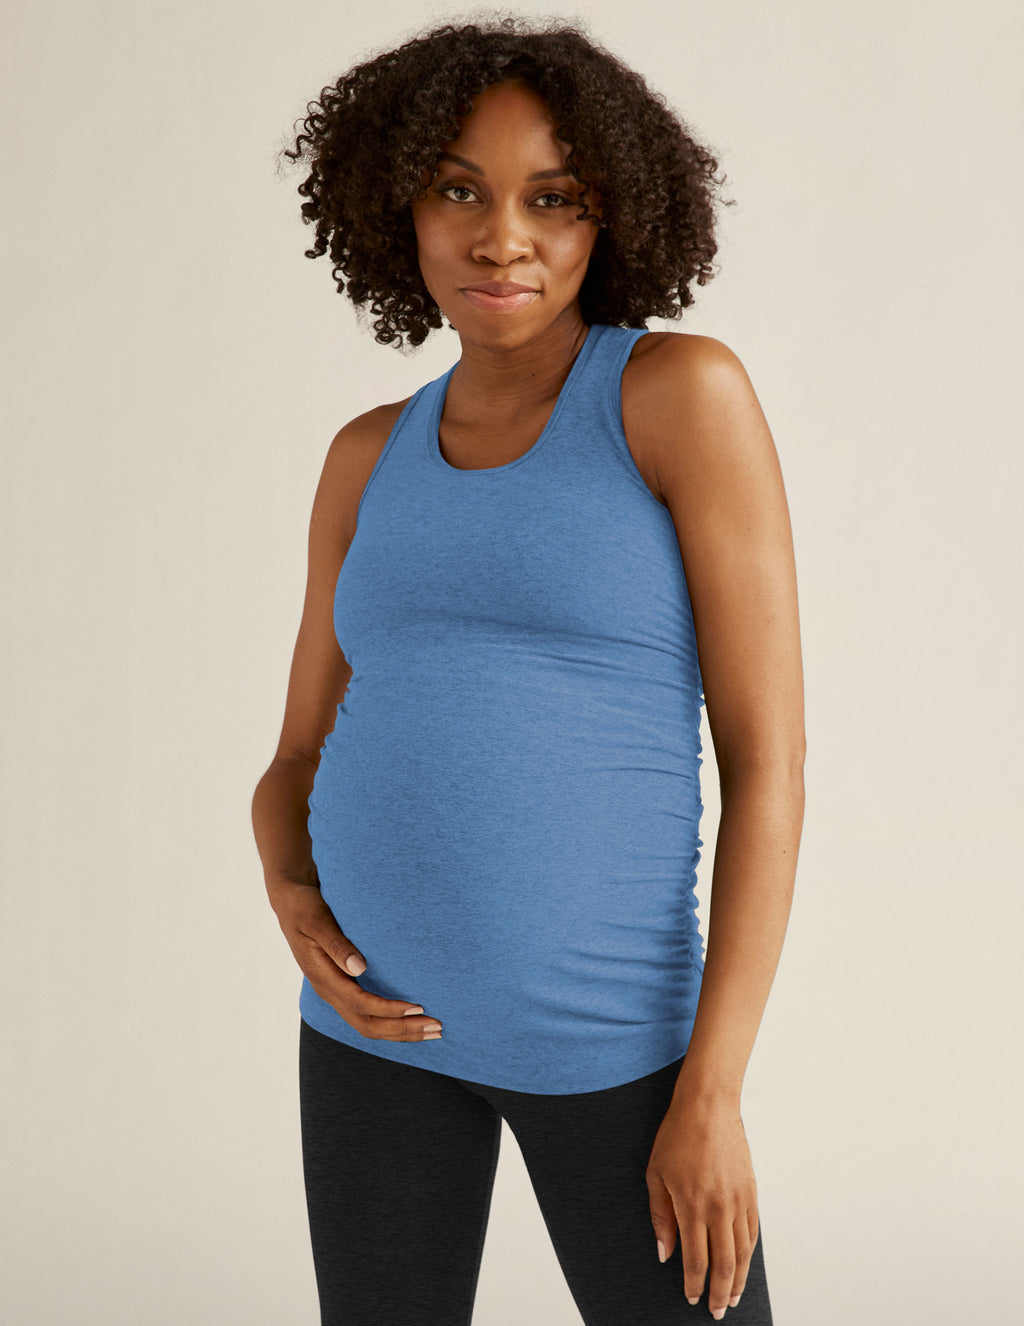 Maternity Tops, Tees and Tanks